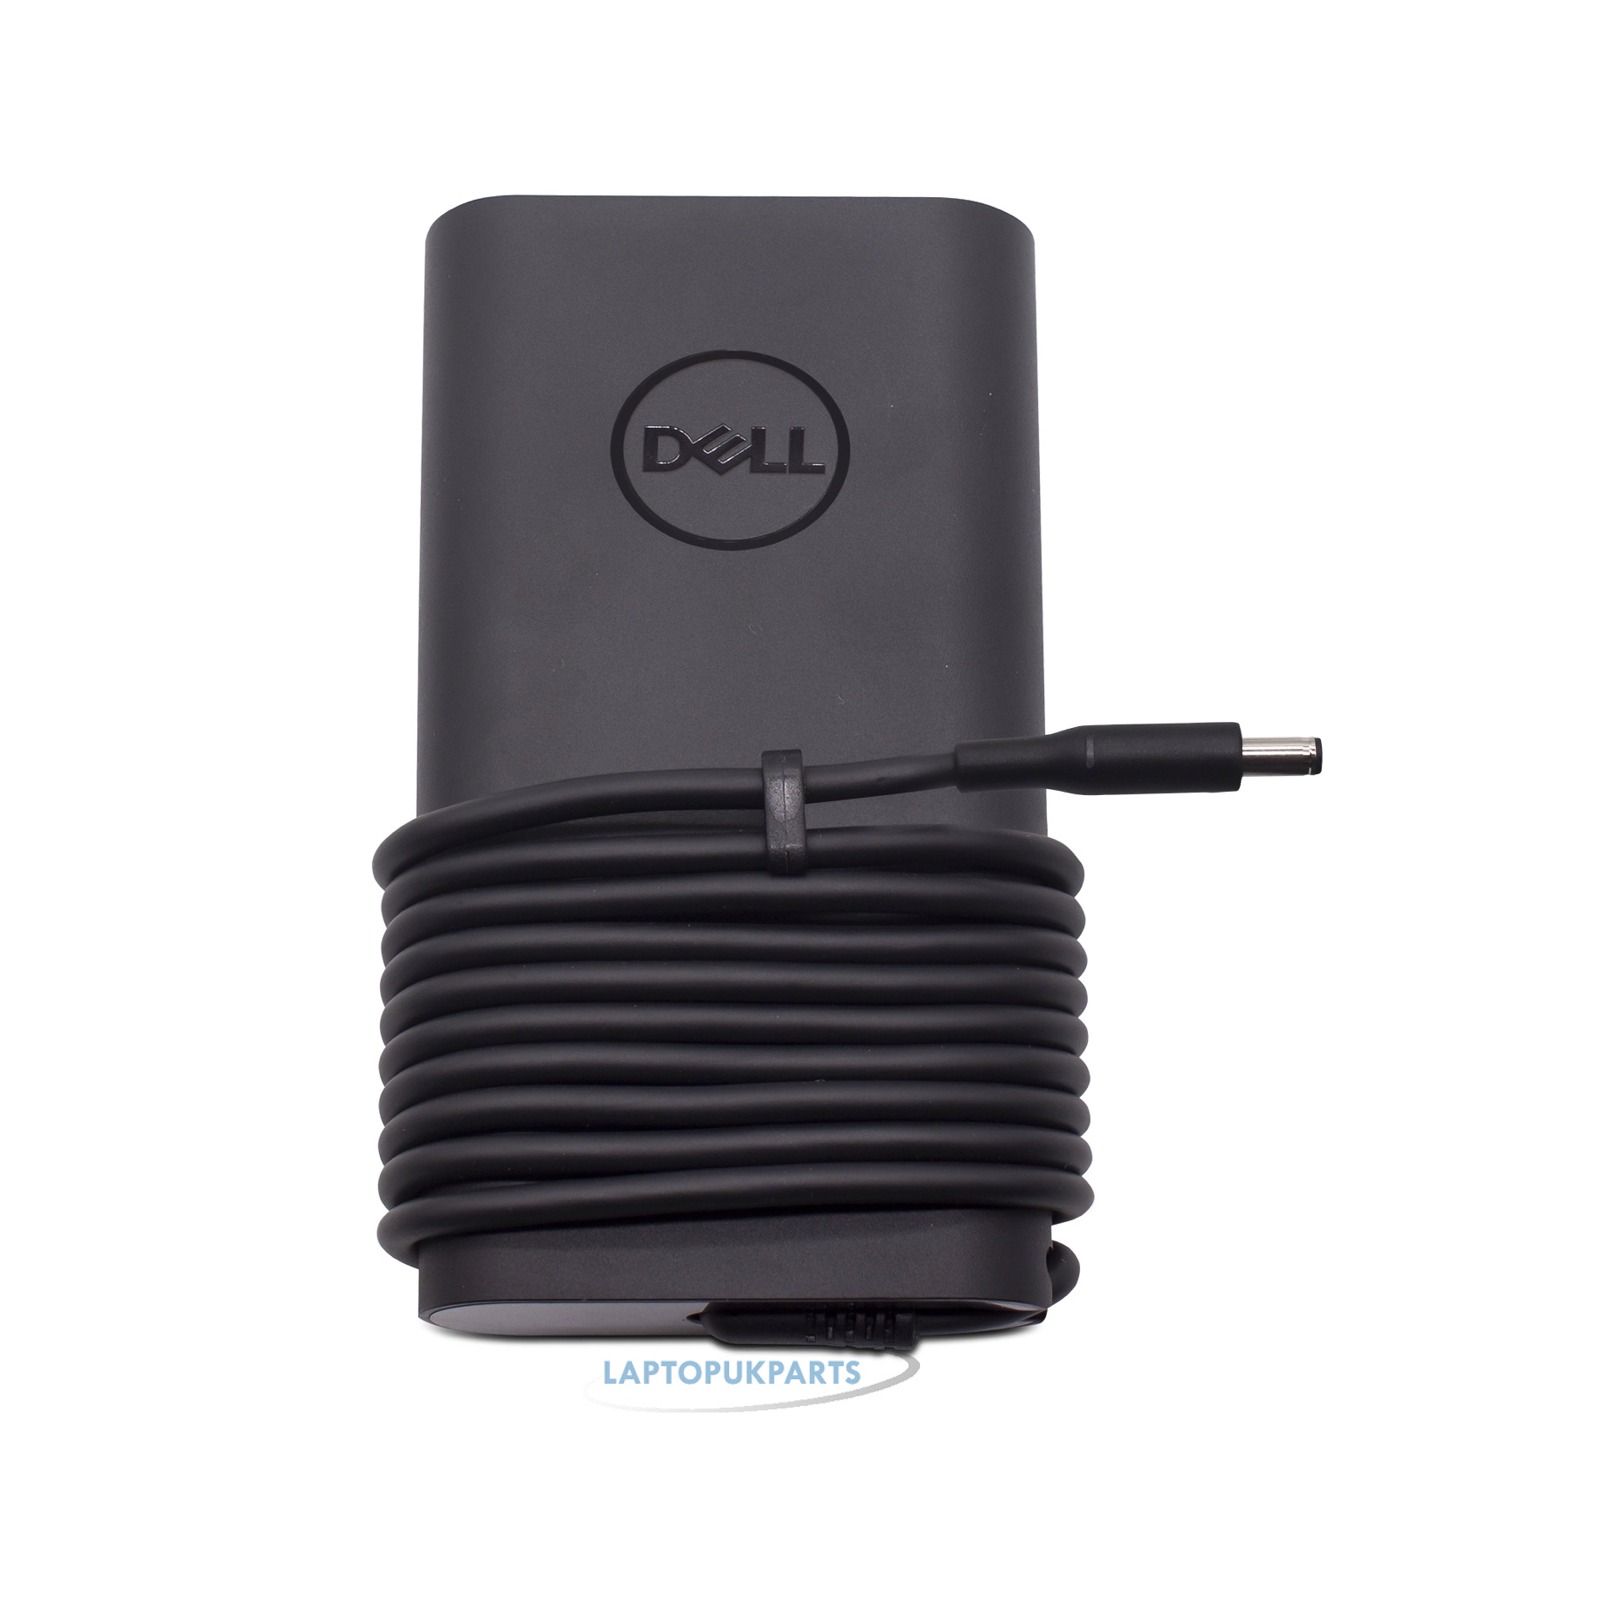 xps 555 battery charger no output